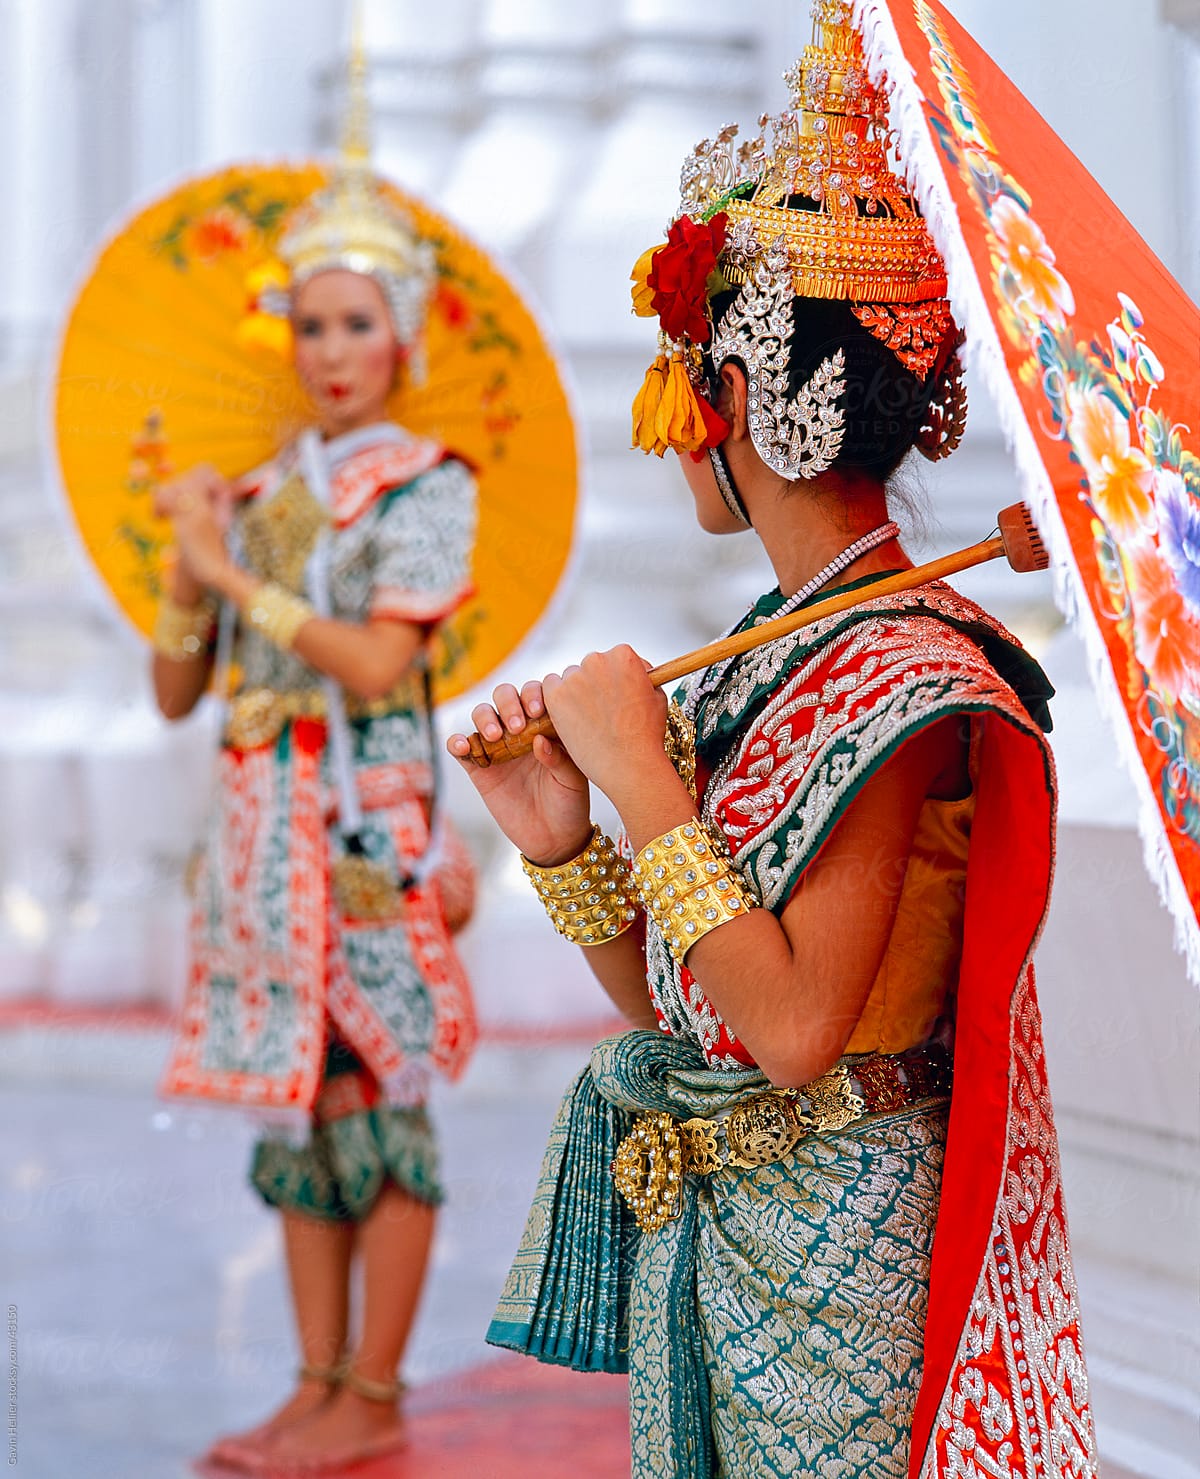 South East Asia, Thailand, Bangkok, two Thai dancers in traditional dance costume holding colourful umbrellas